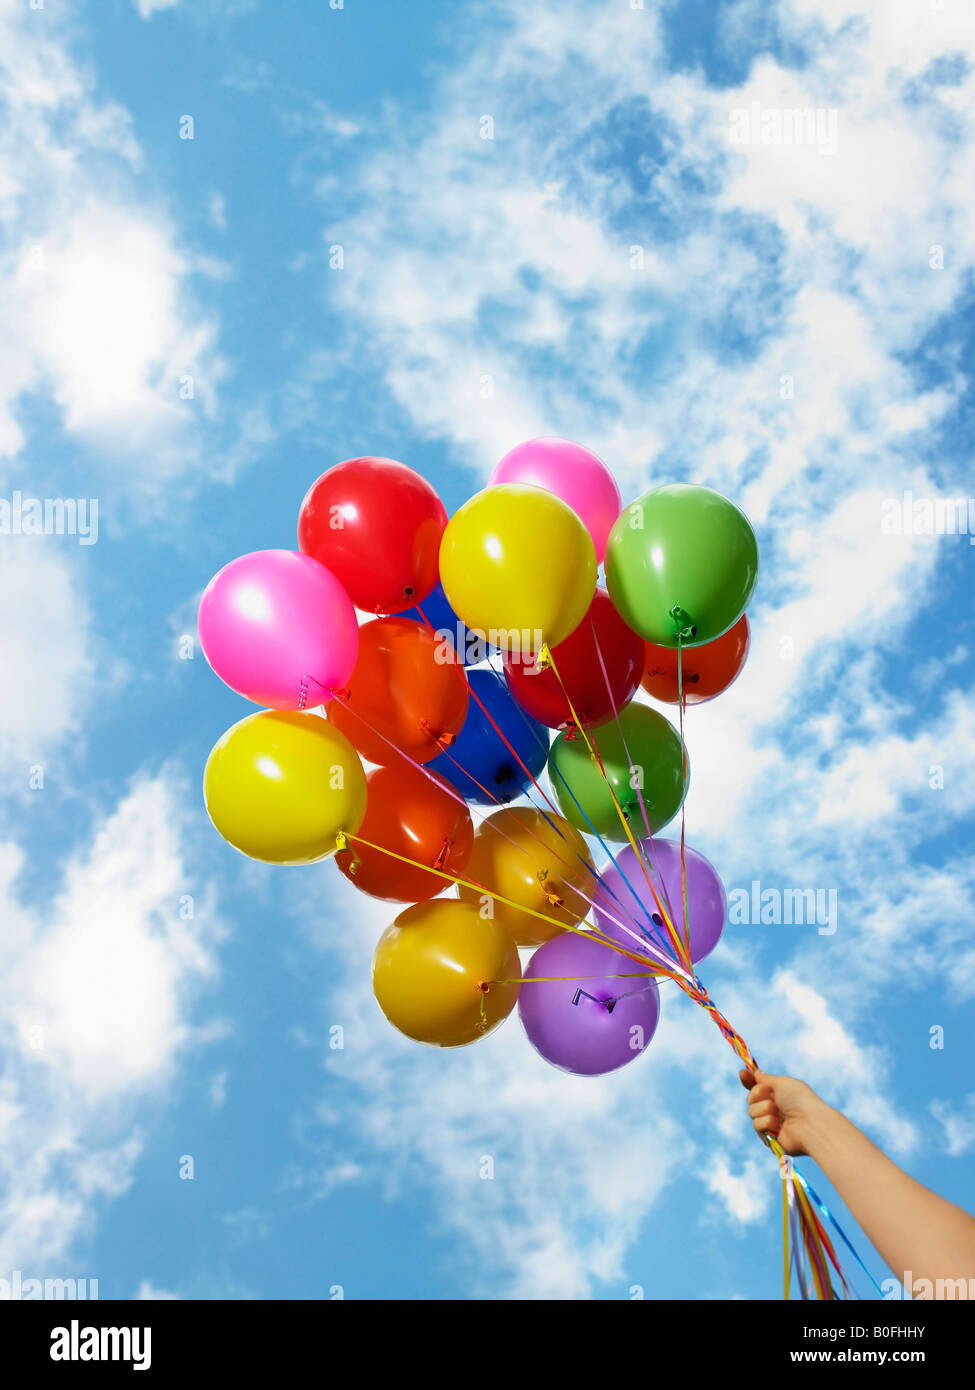 Hand holding colorful balloons Banque D'Images